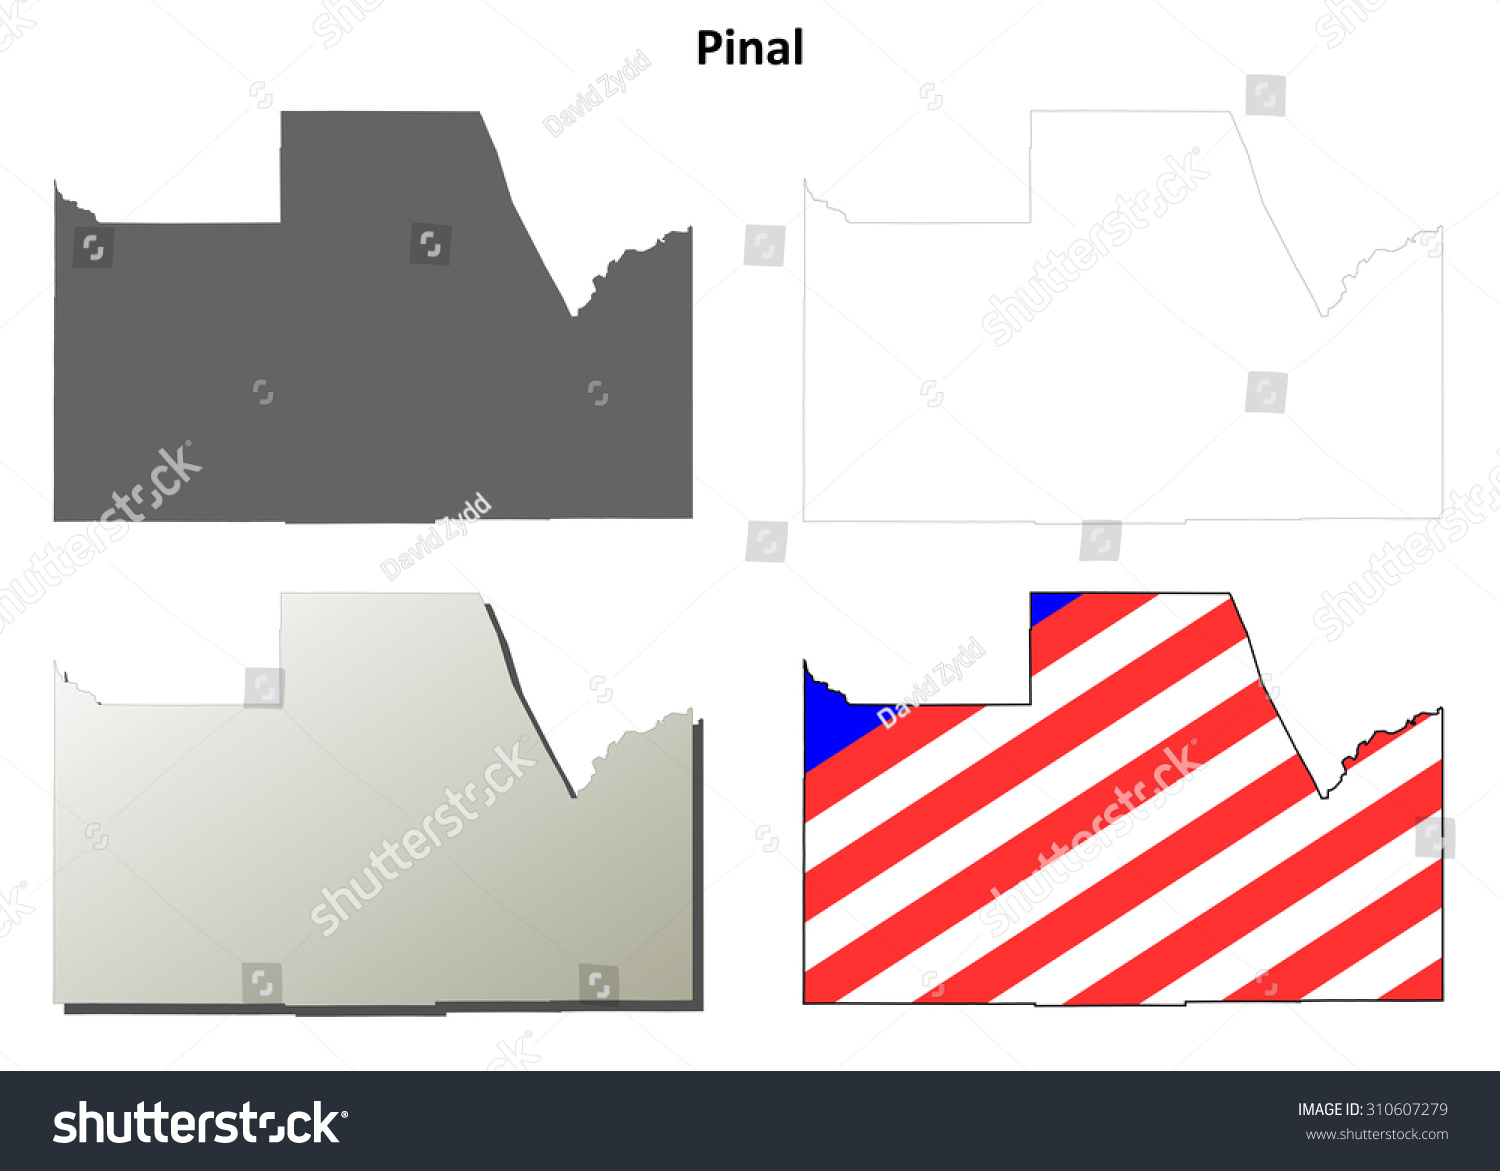 Pinal County Arizona Outline Map Set Royalty Free Stock Vector 310607279 0620